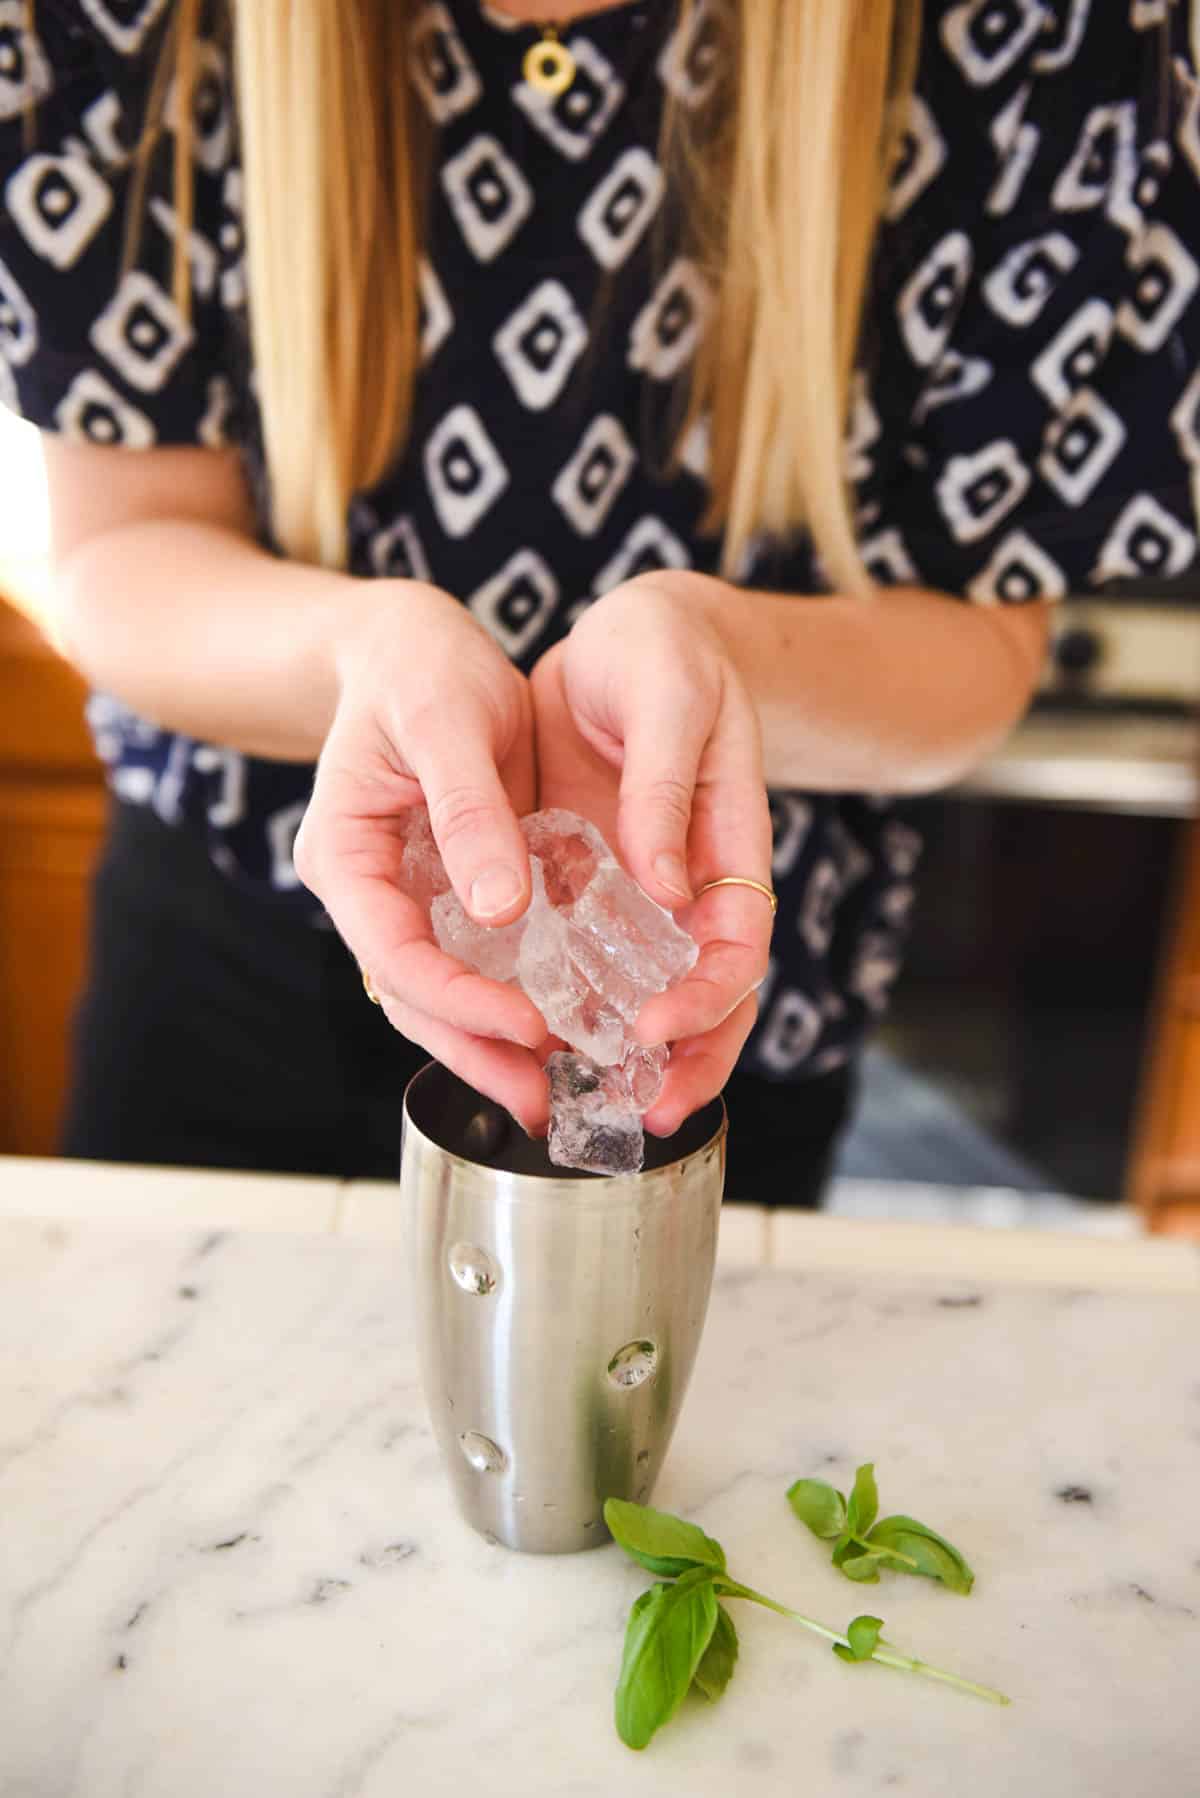 Woman adding ice to the cocktail shaker.